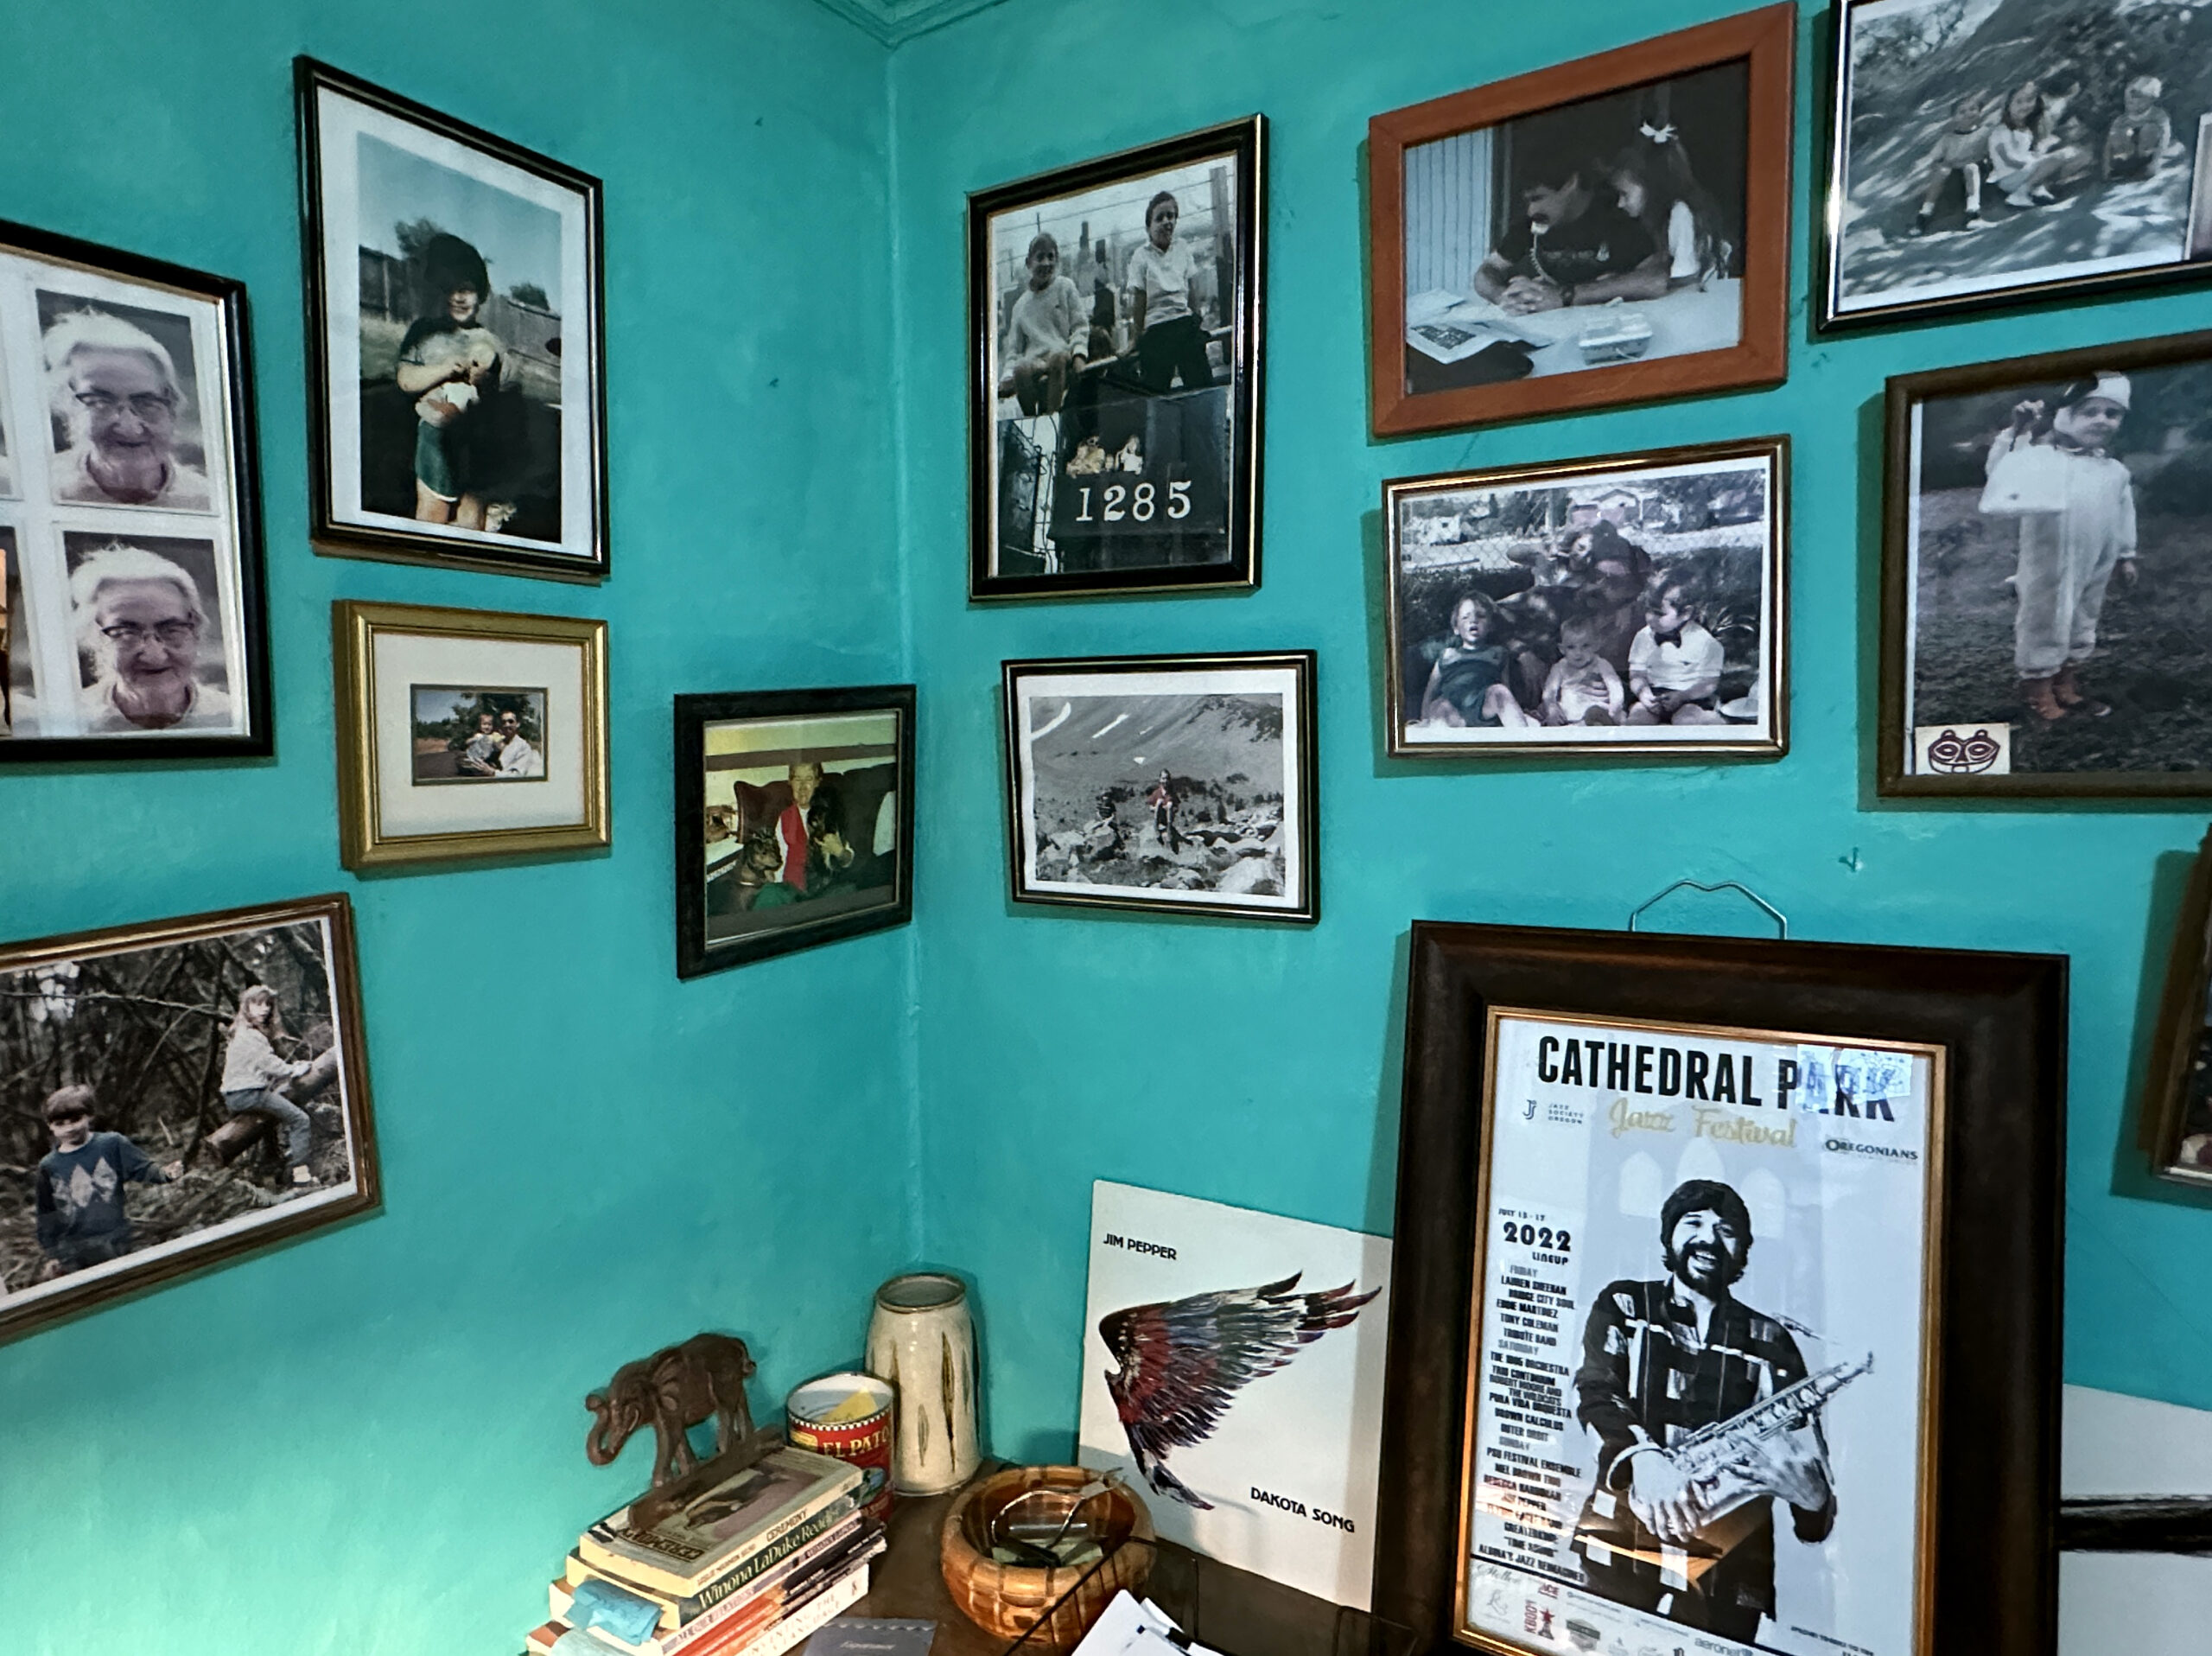 Sean Cruz’s family photos and Jim Pepper posters and memorabilia cover the walls and surfaces in Sean Cruz’s home. The walls are turquoise colored.